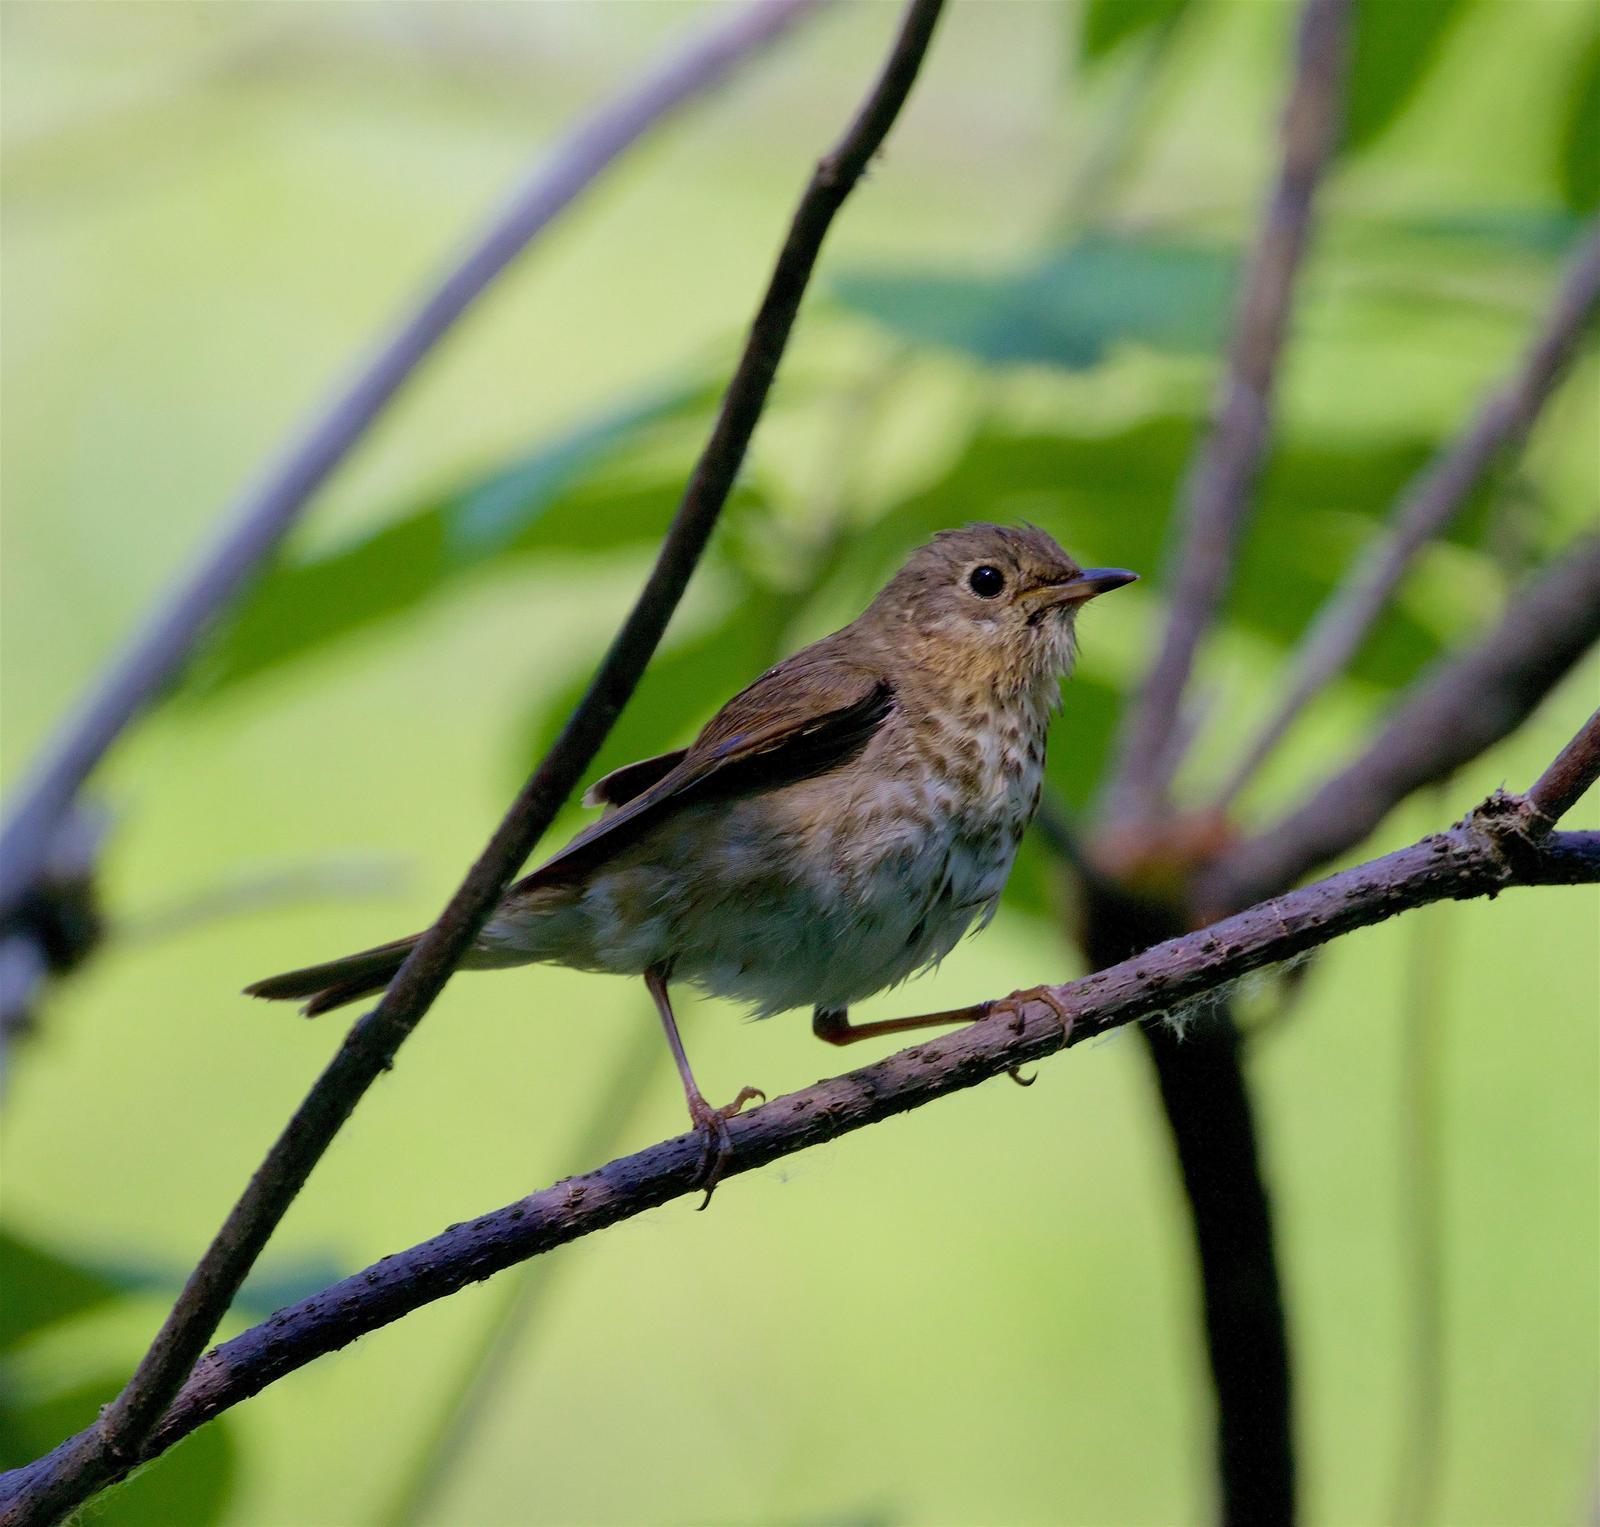 Swainson's Thrush Photo by Kathryn Keith